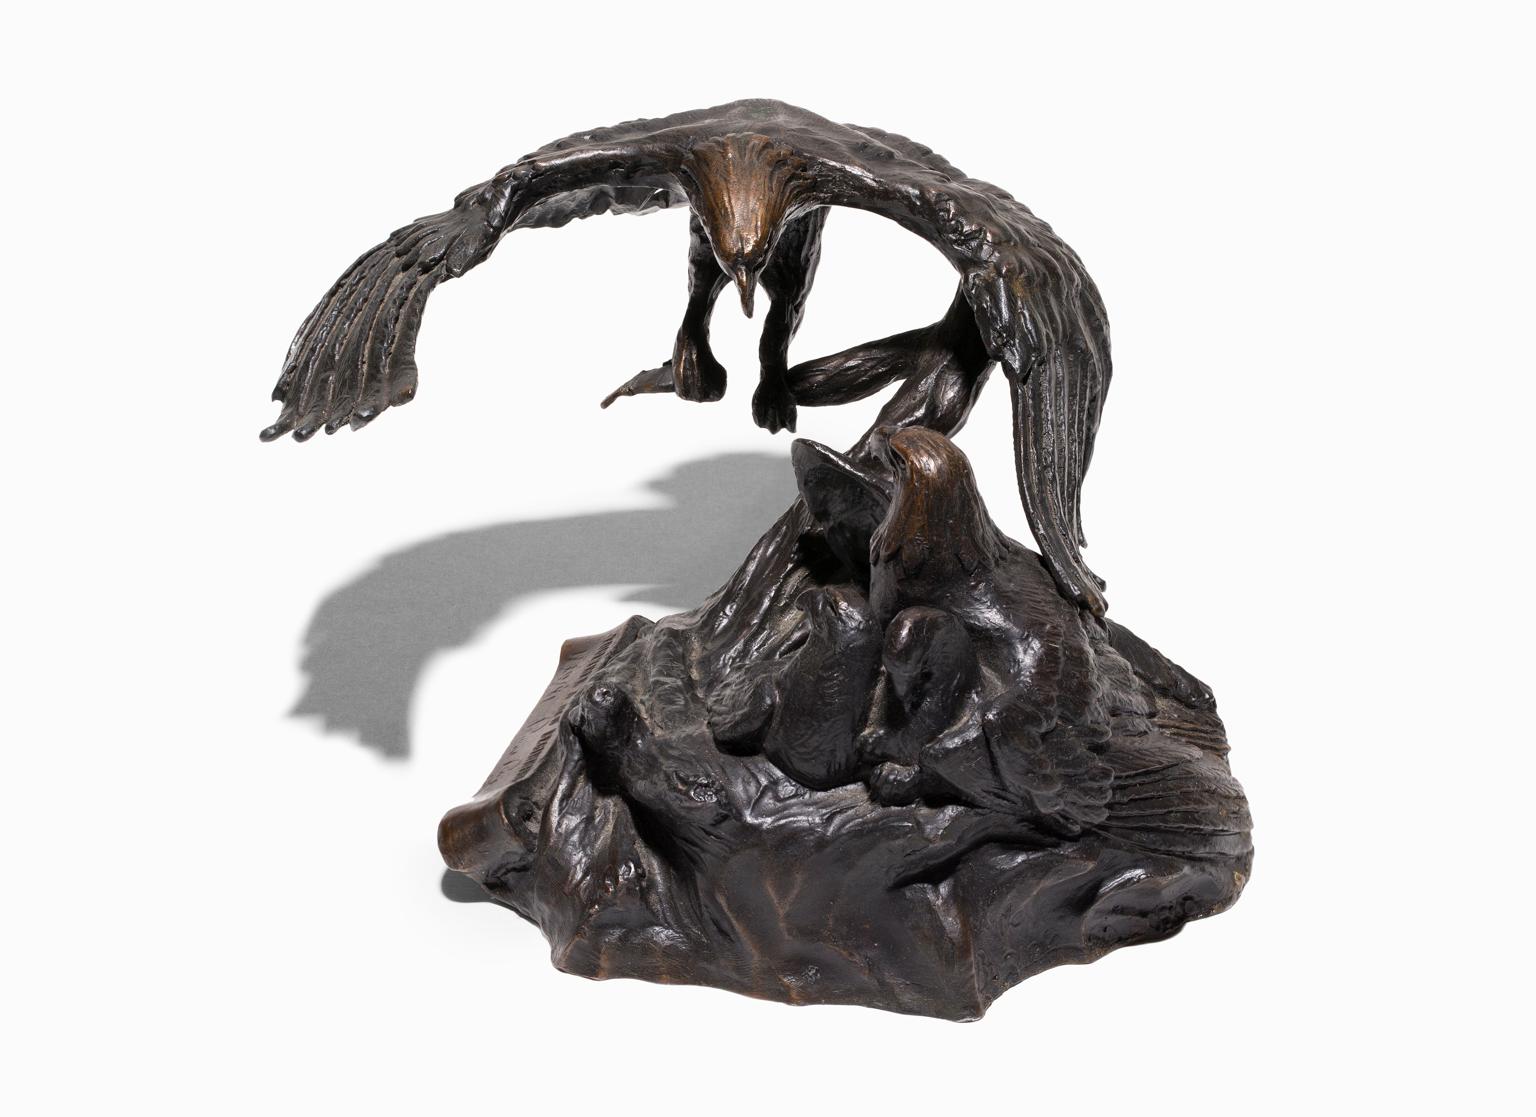 Miley Busiek Frost Figurative Sculpture - "Together A New Beginning", Bronze Eagle Statue Given Out by Ronald Reagan